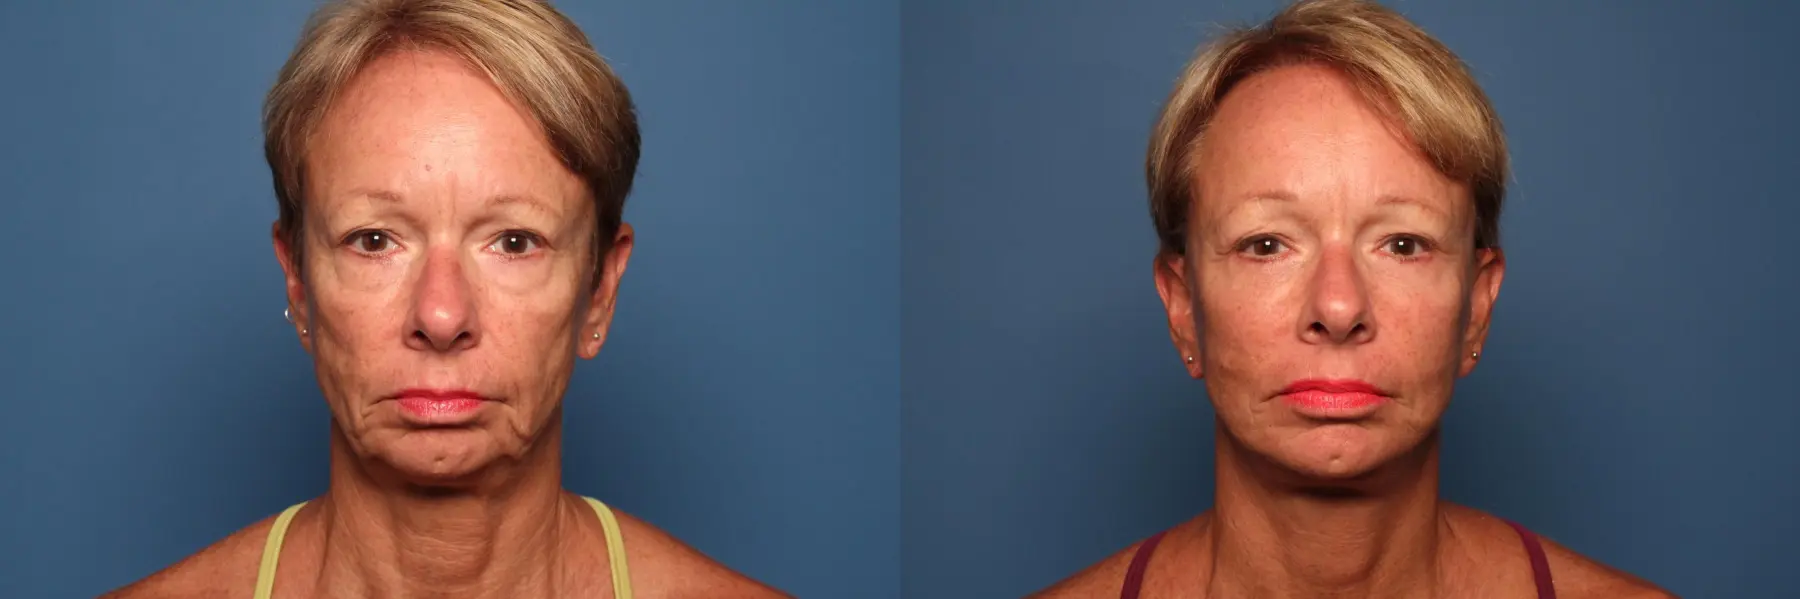 Facelift/Mini Facelift: Patient 4 - Before and After  